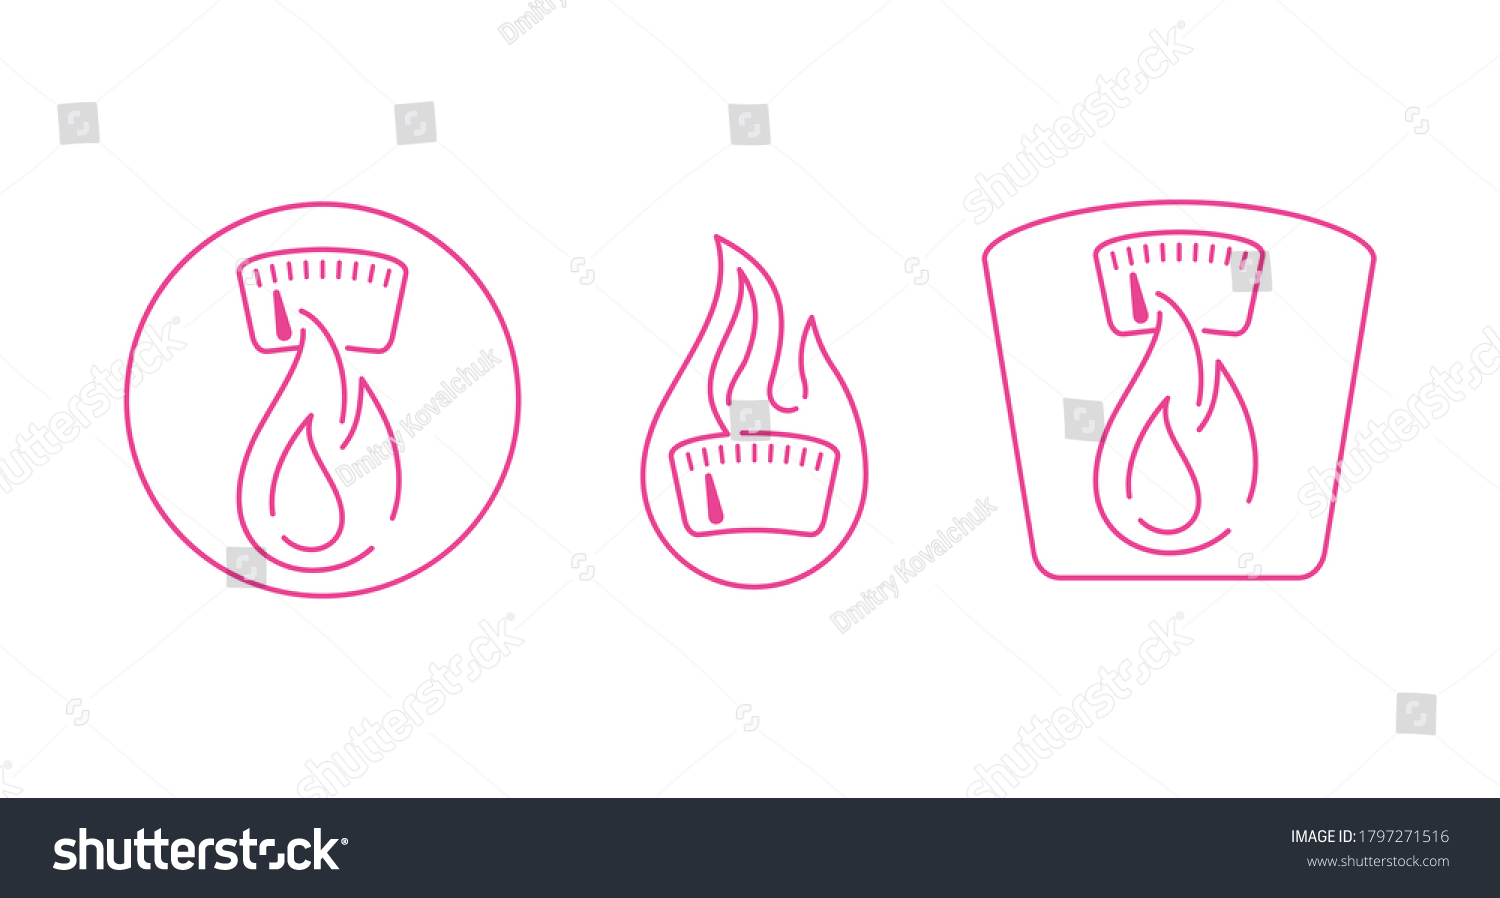 SVG of kcal icon (calories sign) combination of flame (fat burning) and weight scales - thin line emblem in 3 variations for healthy food, fitness or diet program packaging svg